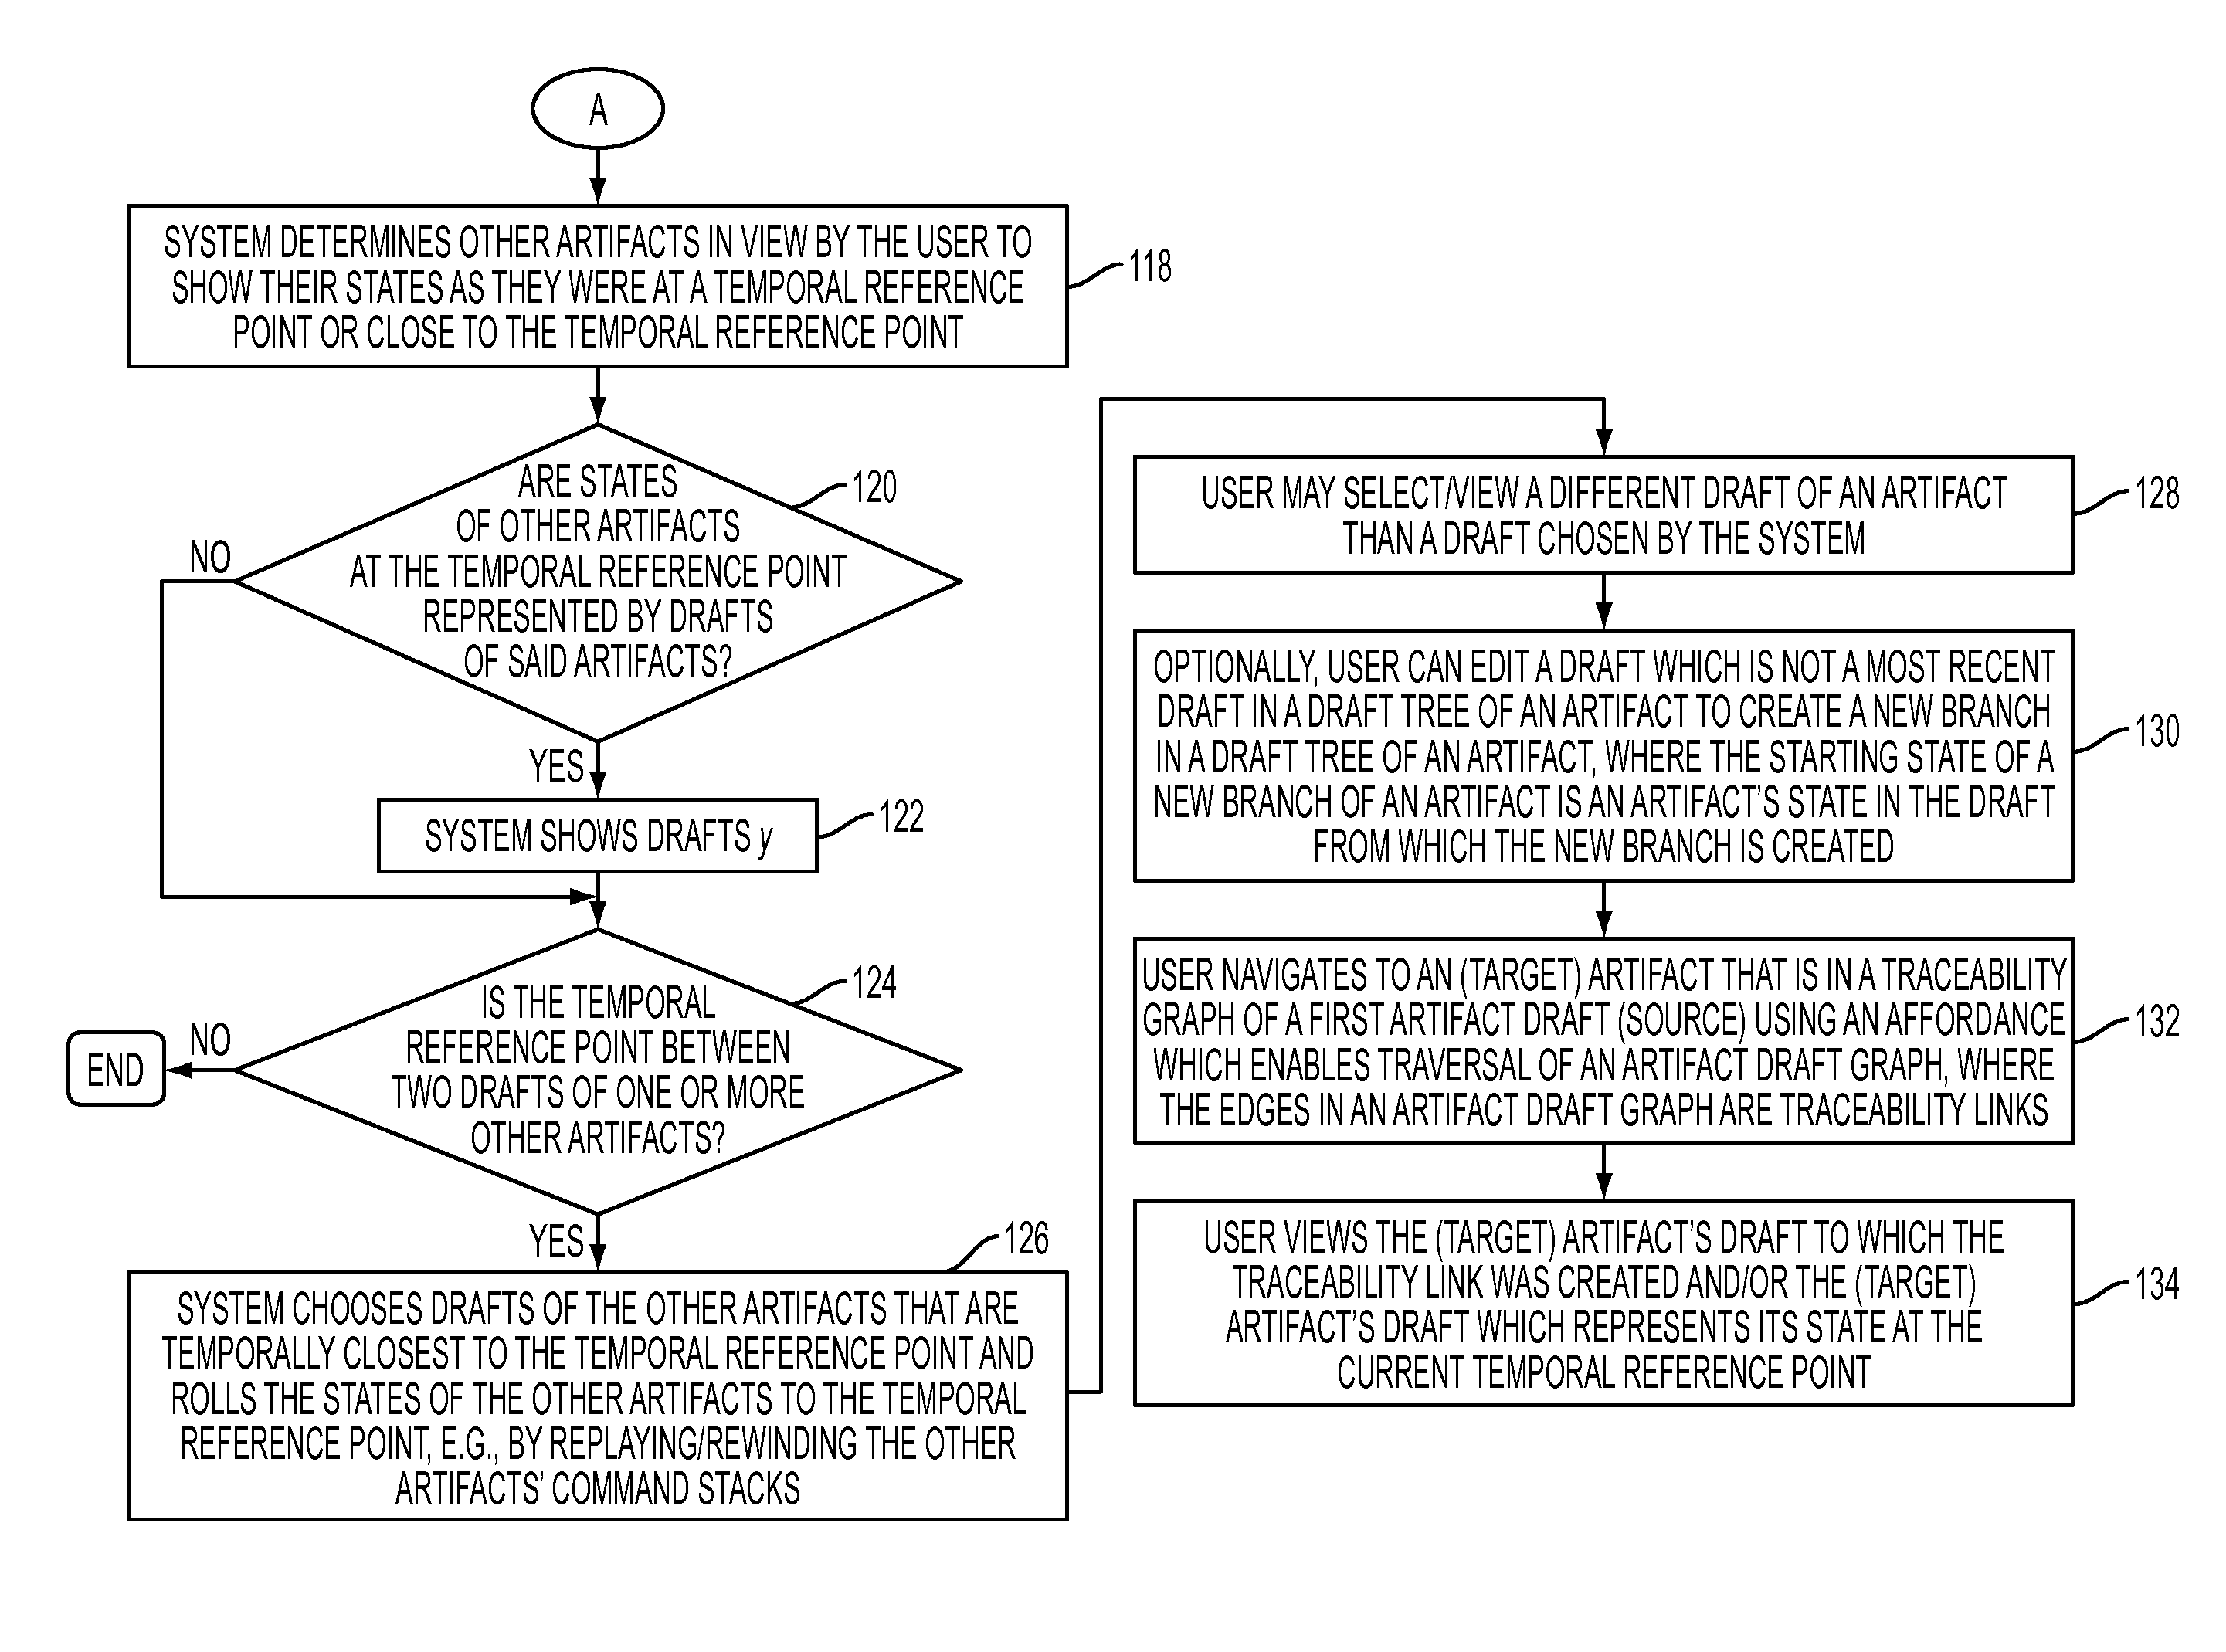 System to view and manipulate artifacts at a temporal reference point